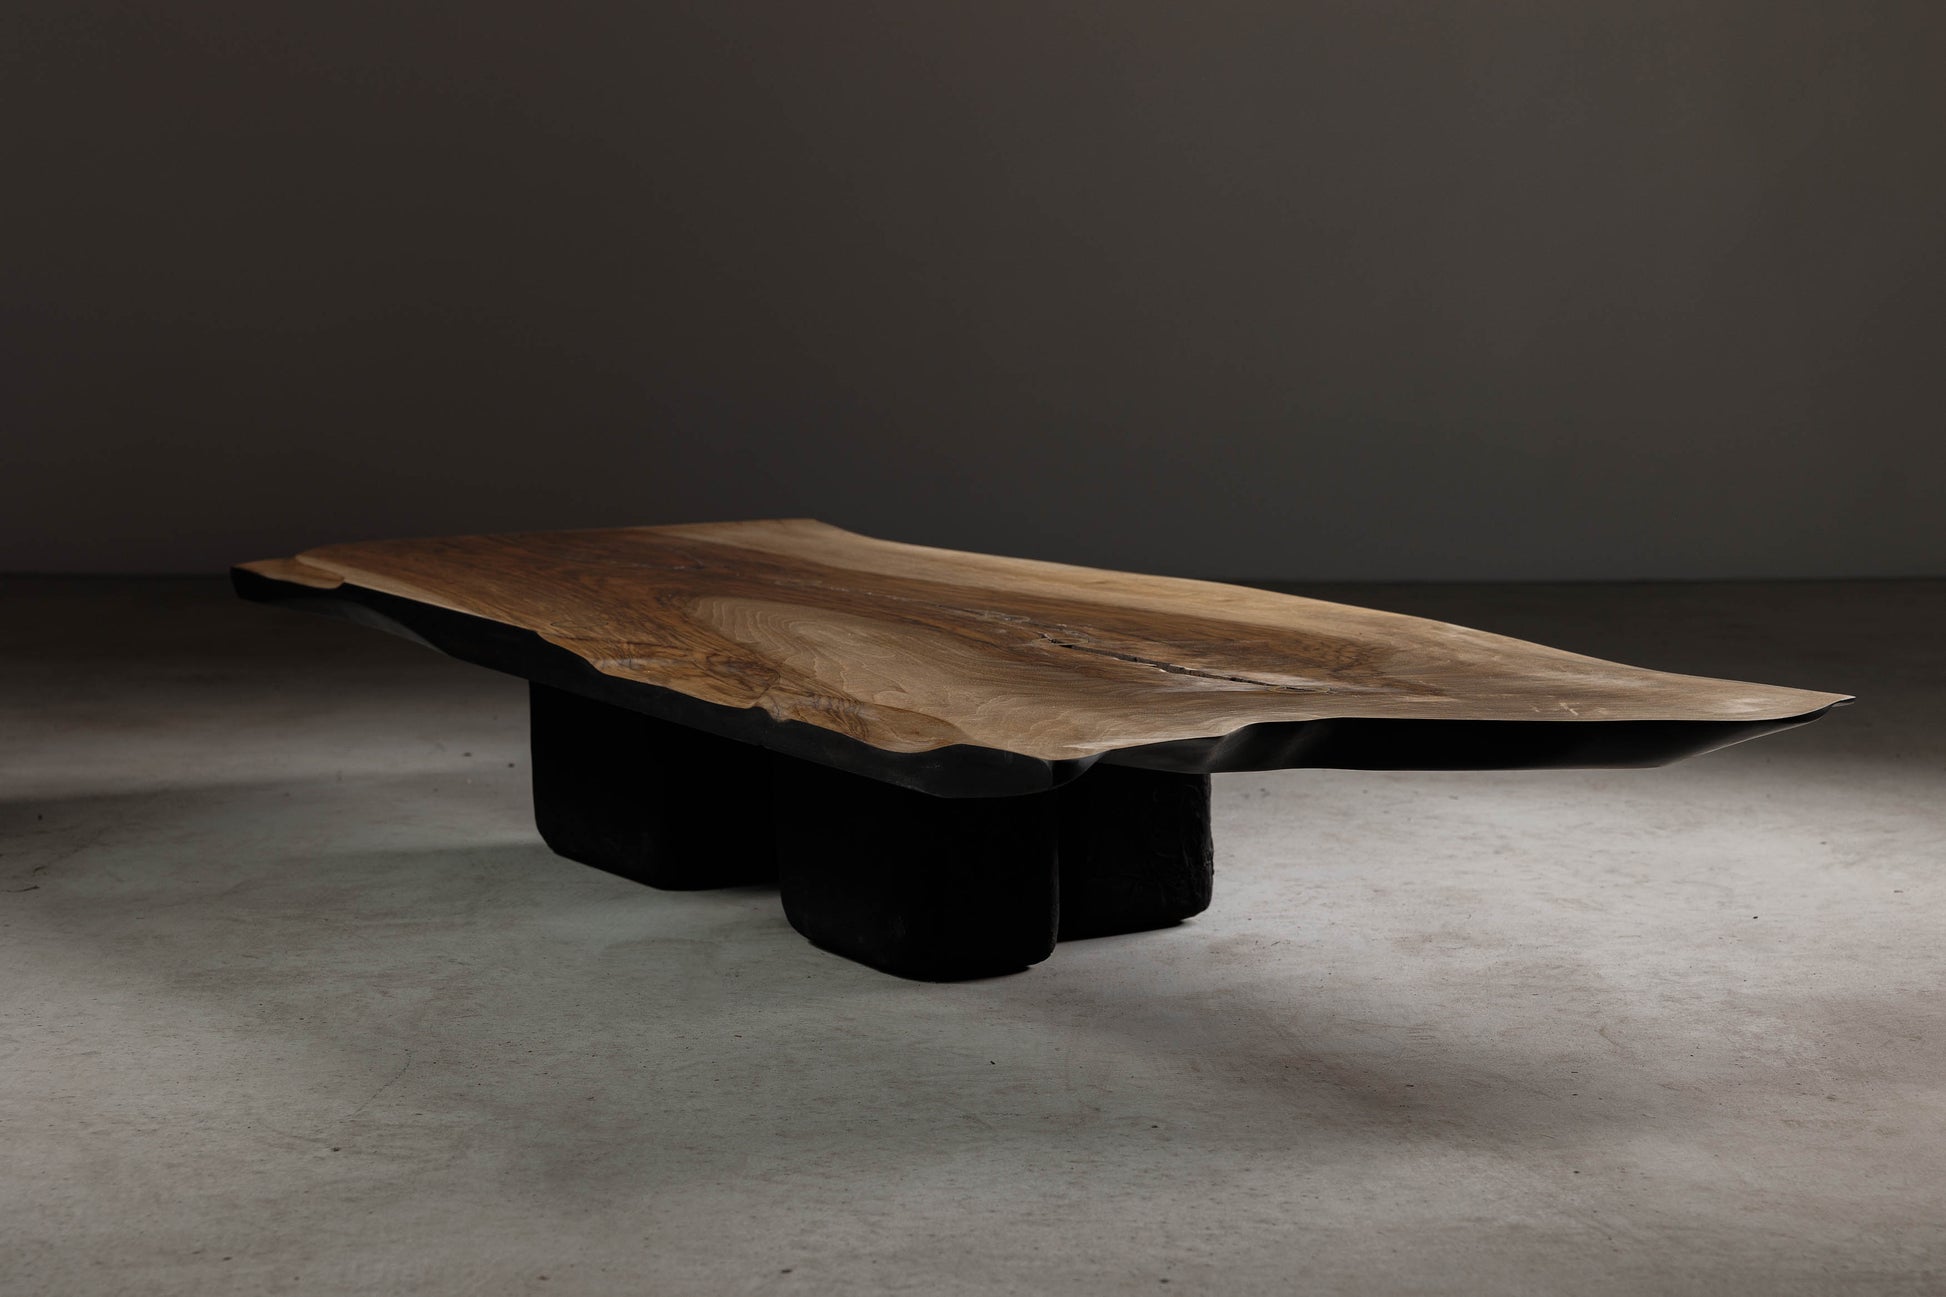 Modern Organic Walnut Coffee Table EM109 Part Of 18Brut Collection | Perspective image of the unique coffee table.